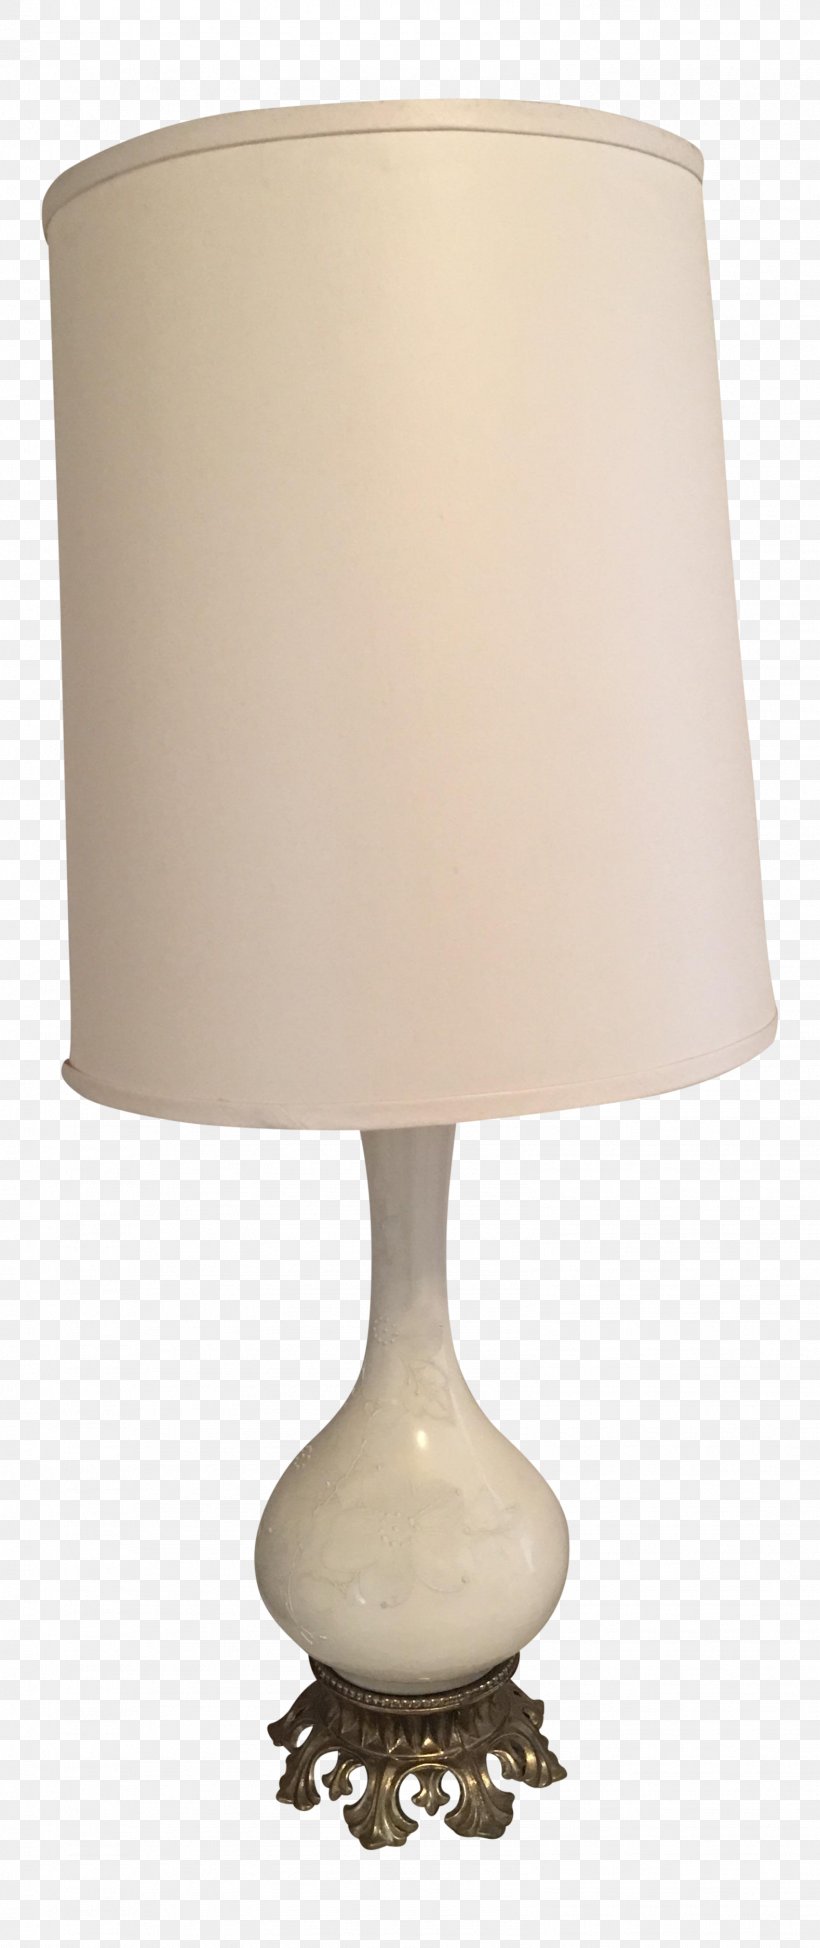 Product Design Lamp Shades Table M Lamp Restoration, PNG, 1579x3752px, Lamp Shades, Lamp, Lampshade, Light Fixture, Lighting Download Free